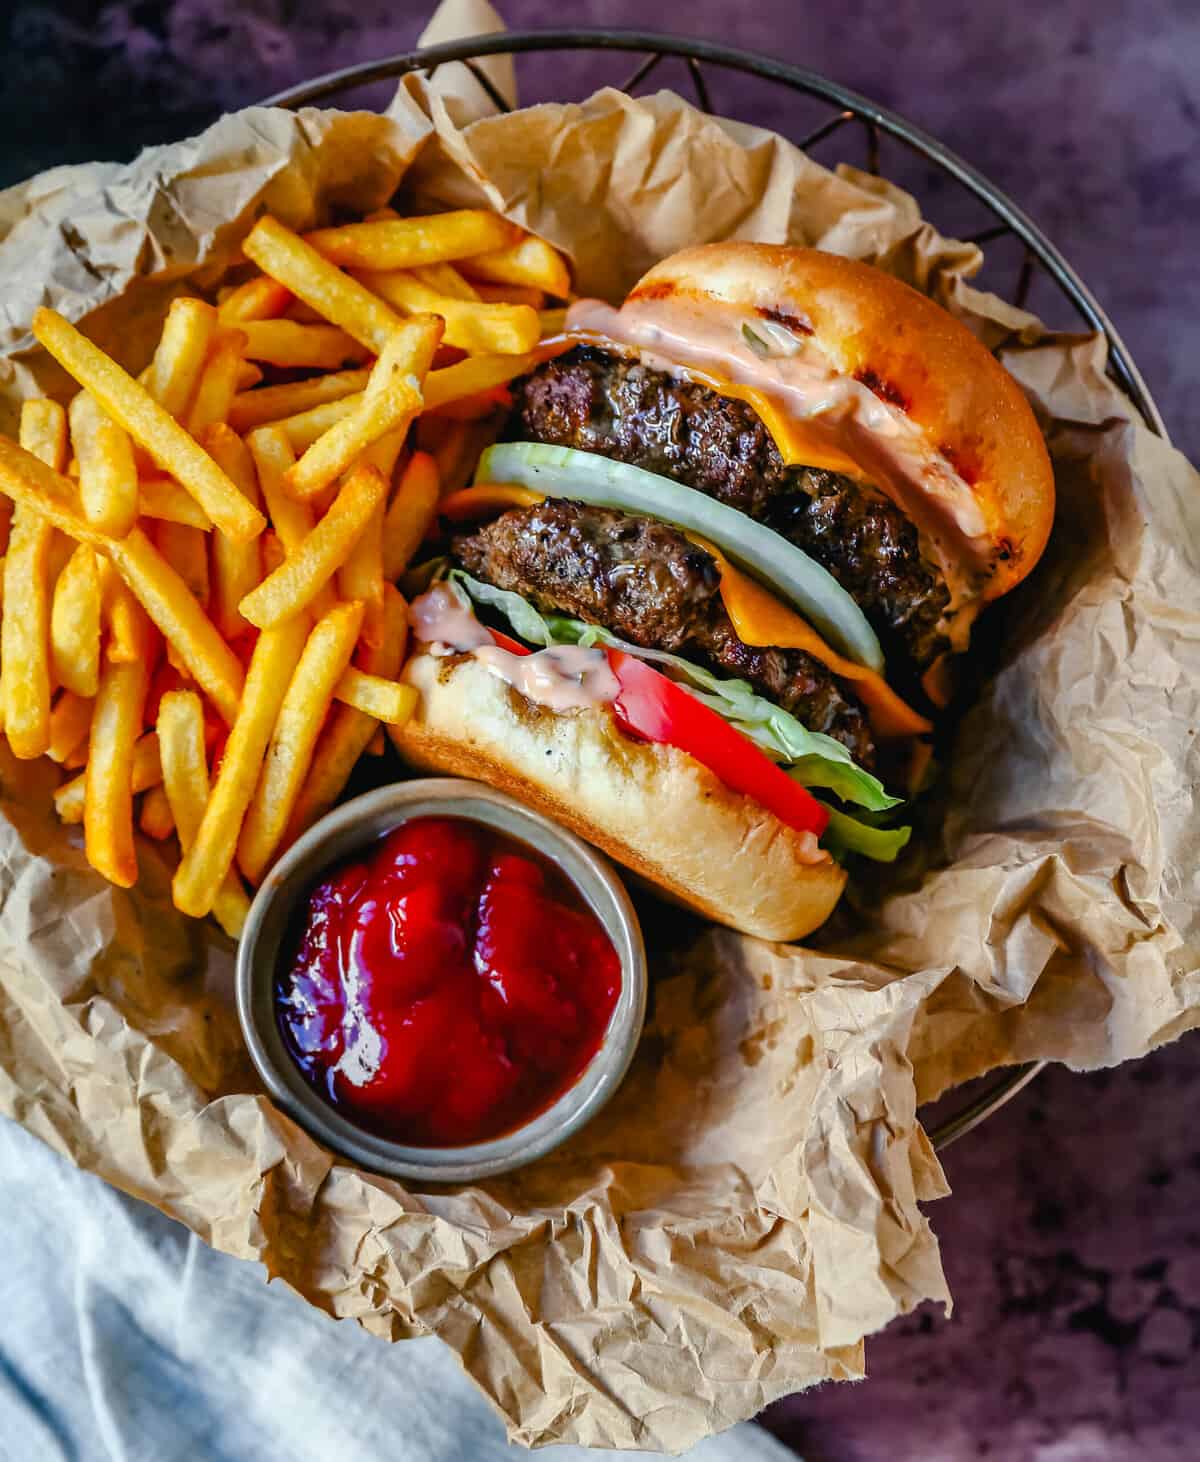 https://www.modernhoney.com/wp-content/uploads/2022/05/Double-Double-Cheeseburger-with-Fries-Recipe-scaled.jpg